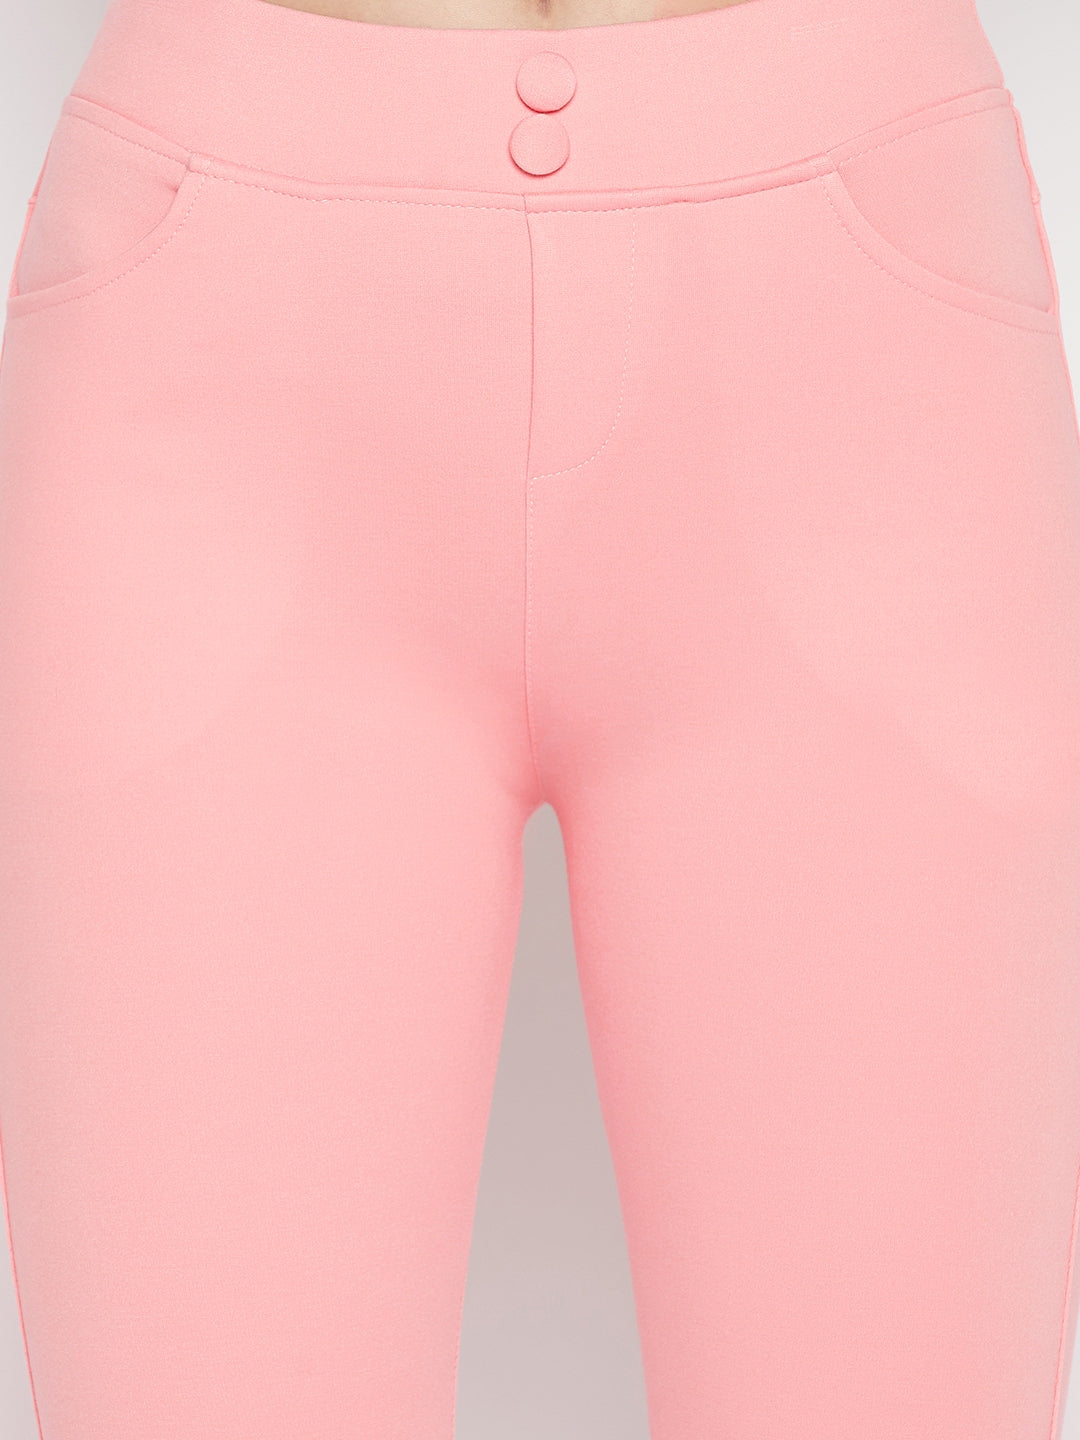 Clora Pink Solid Jeggings